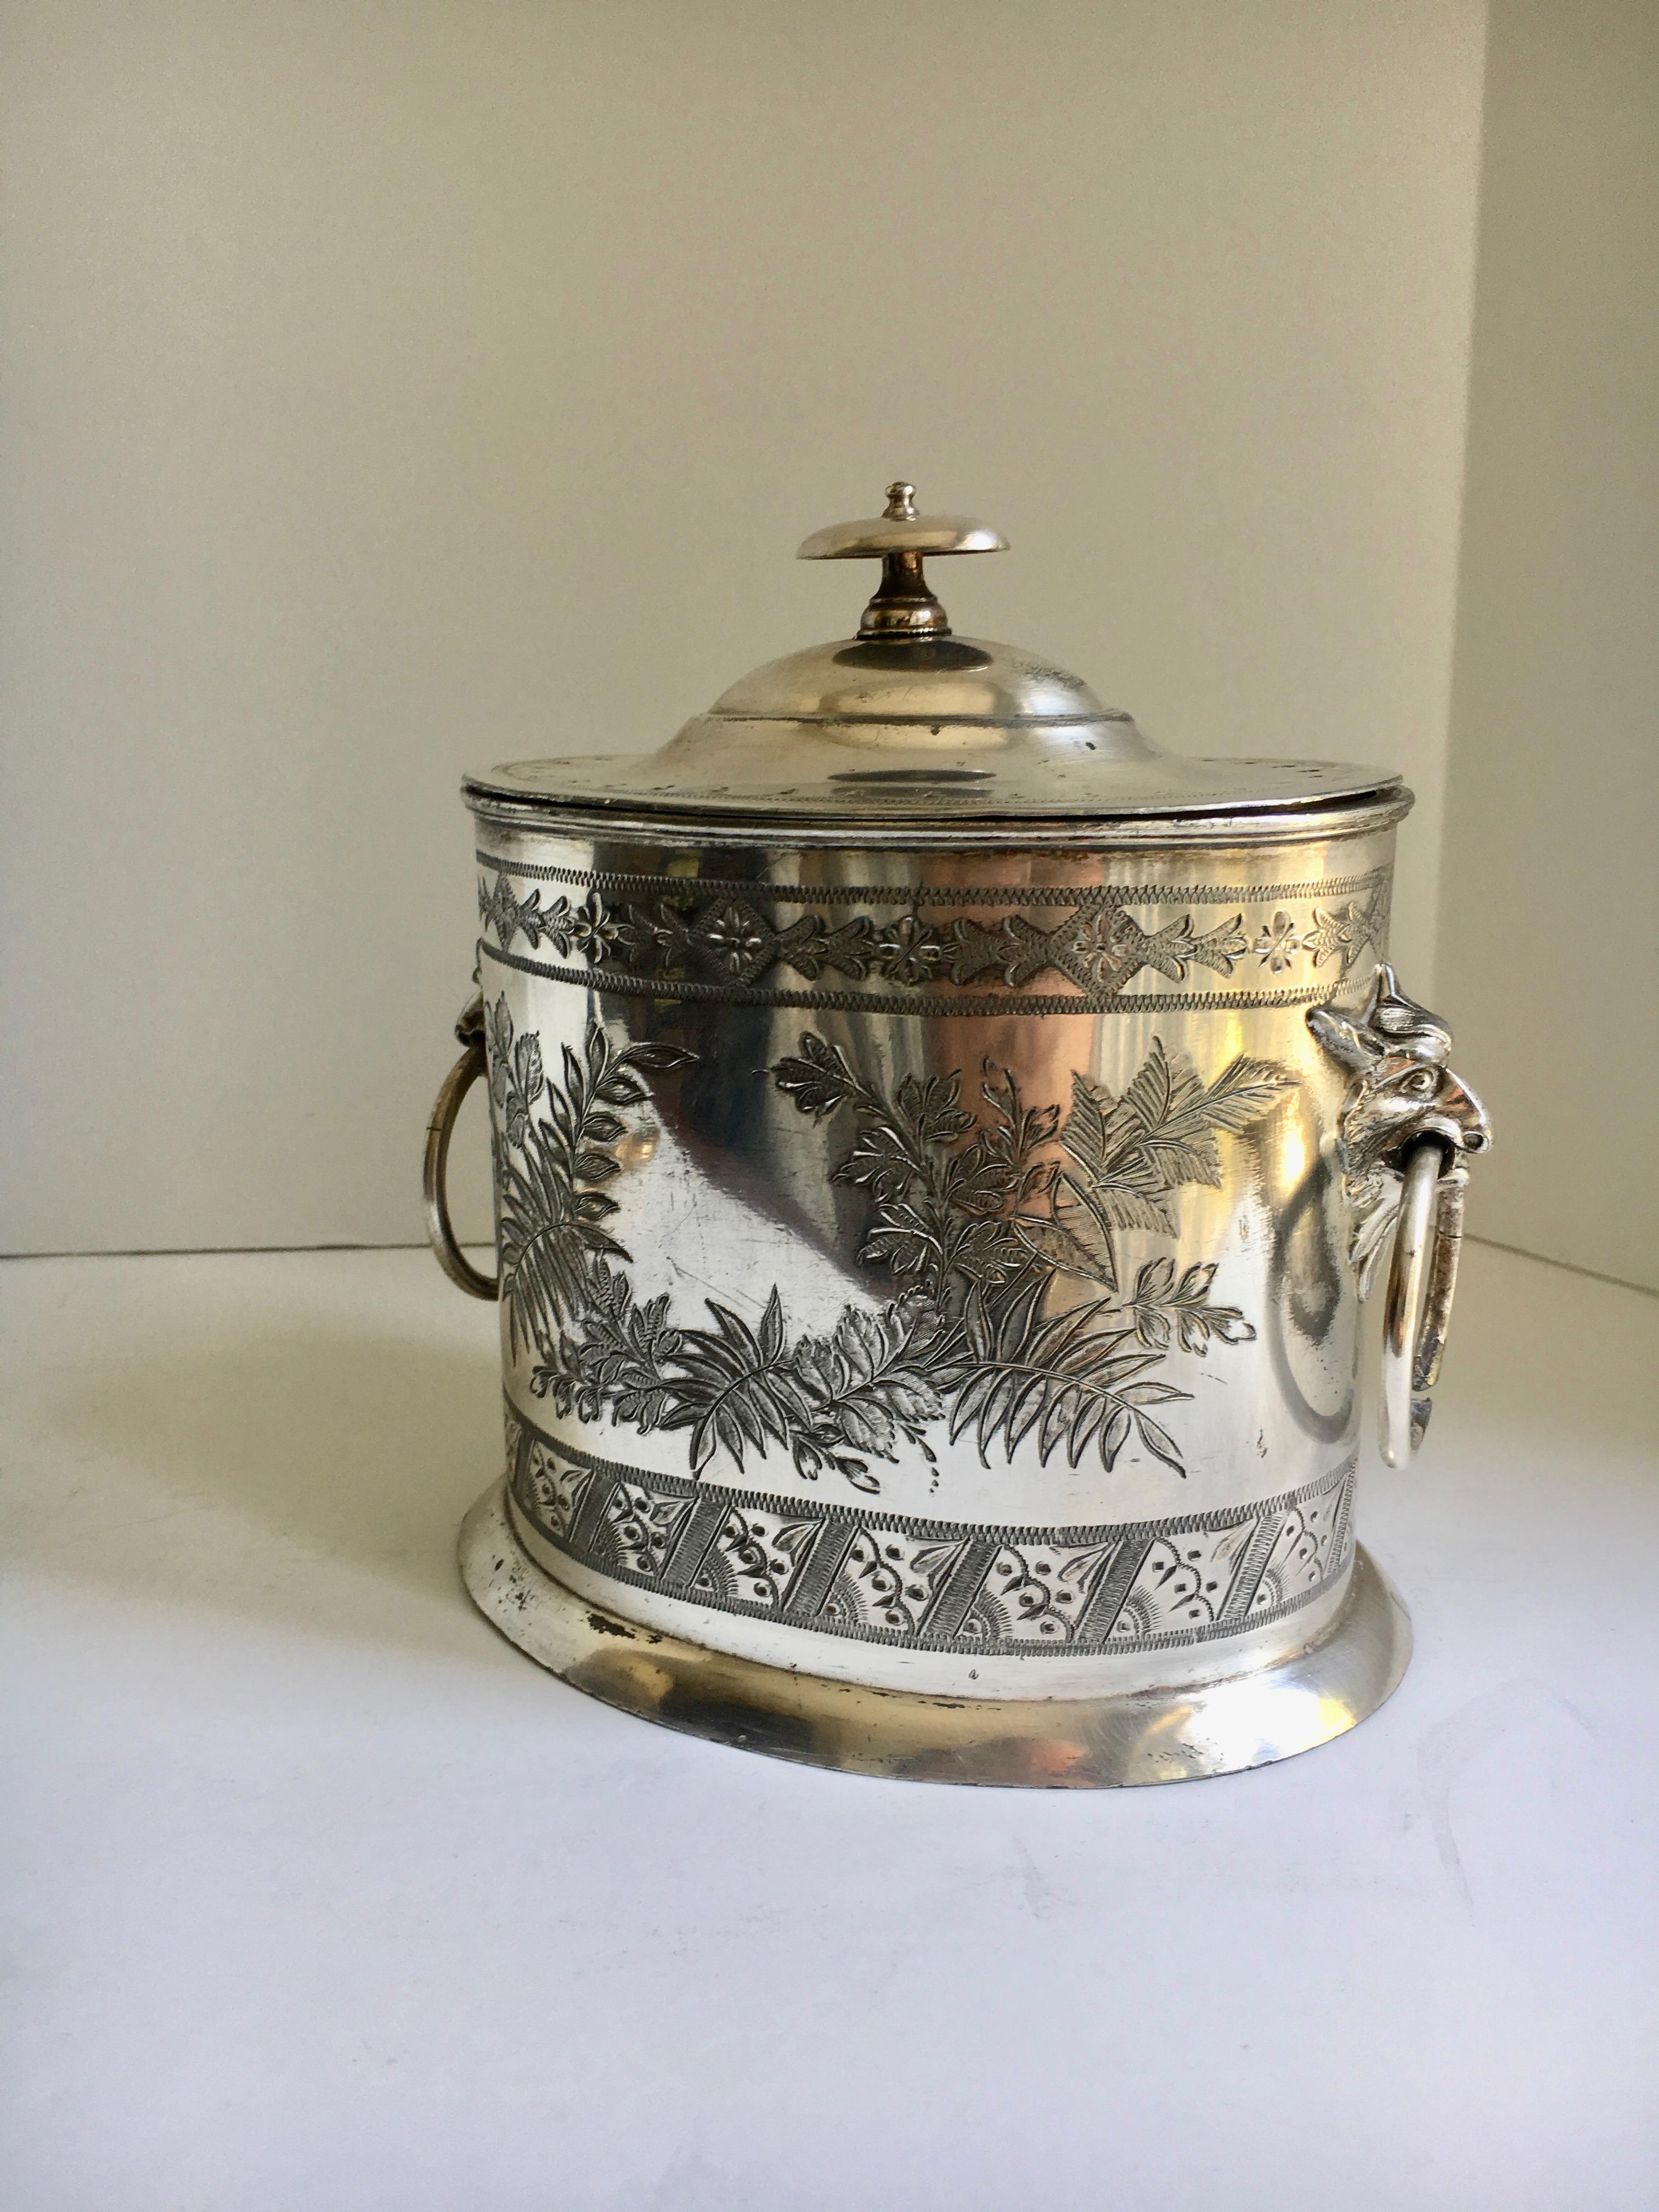 A lovely tea caddy - beautifully aged - use as a tea caddy or to hold notes, supplies or jewelry?

We love the patina and the lions heads handles.